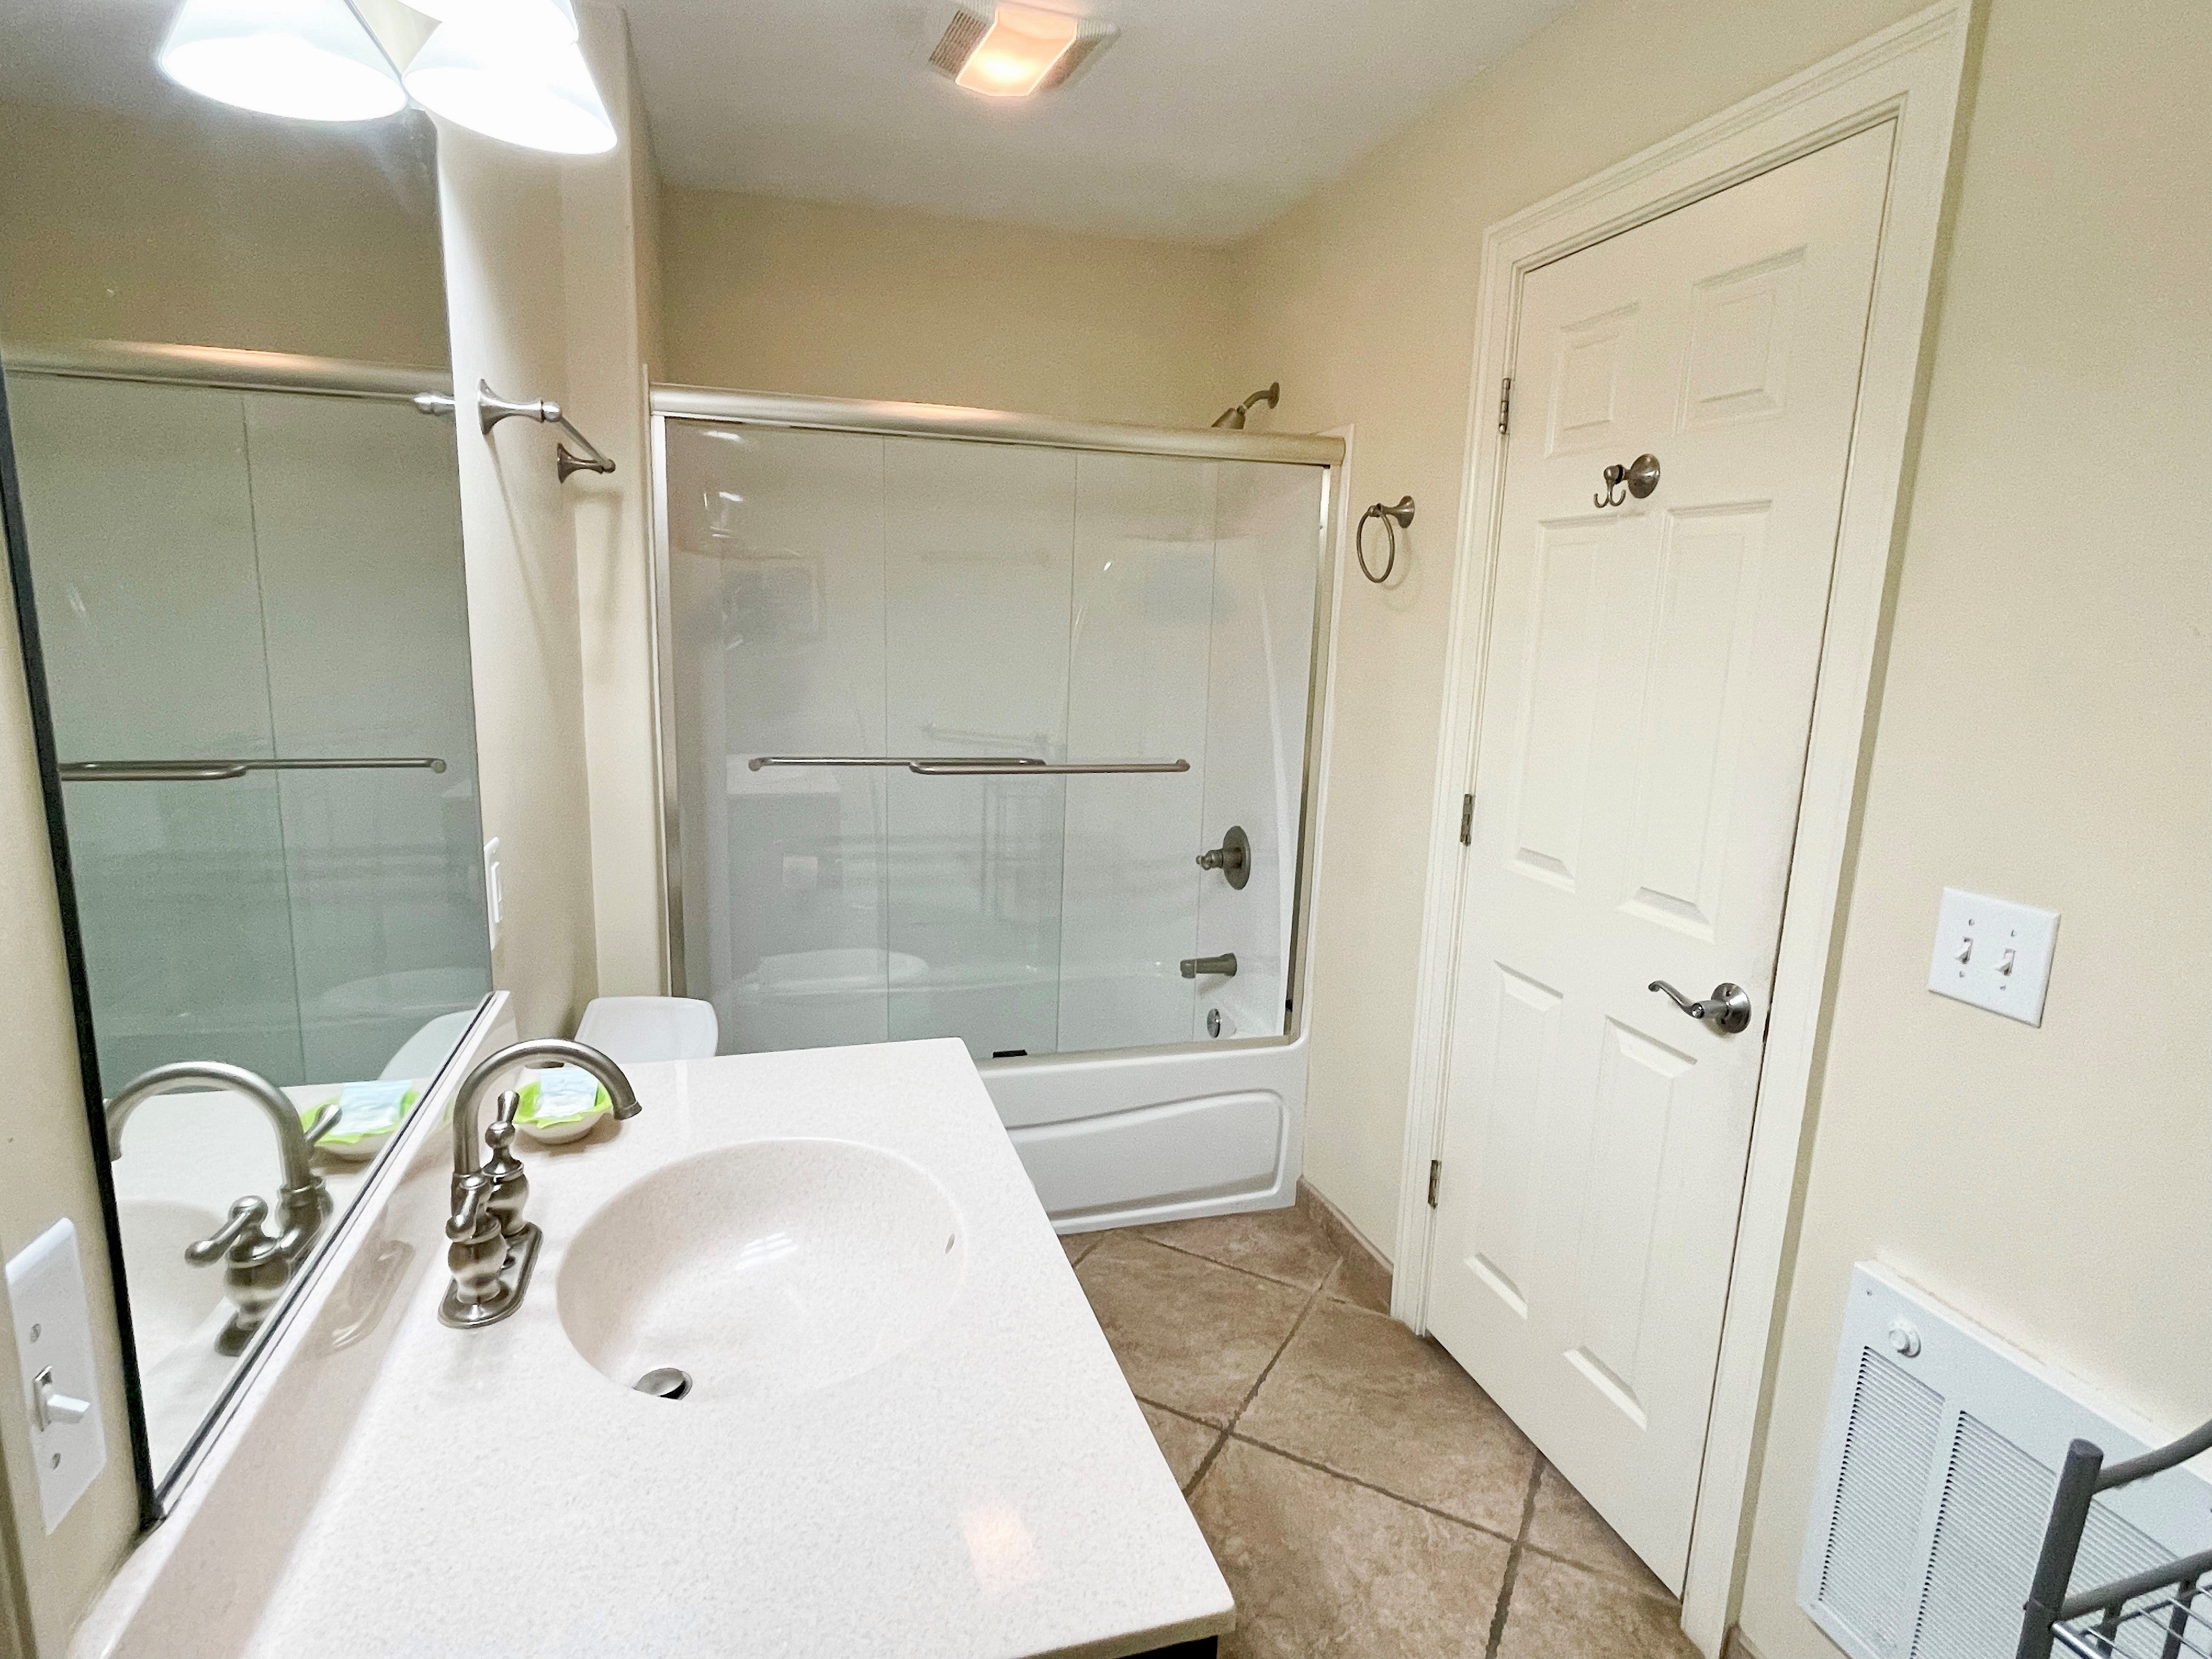 Shared Bath with Tub/Shower, Second Floor